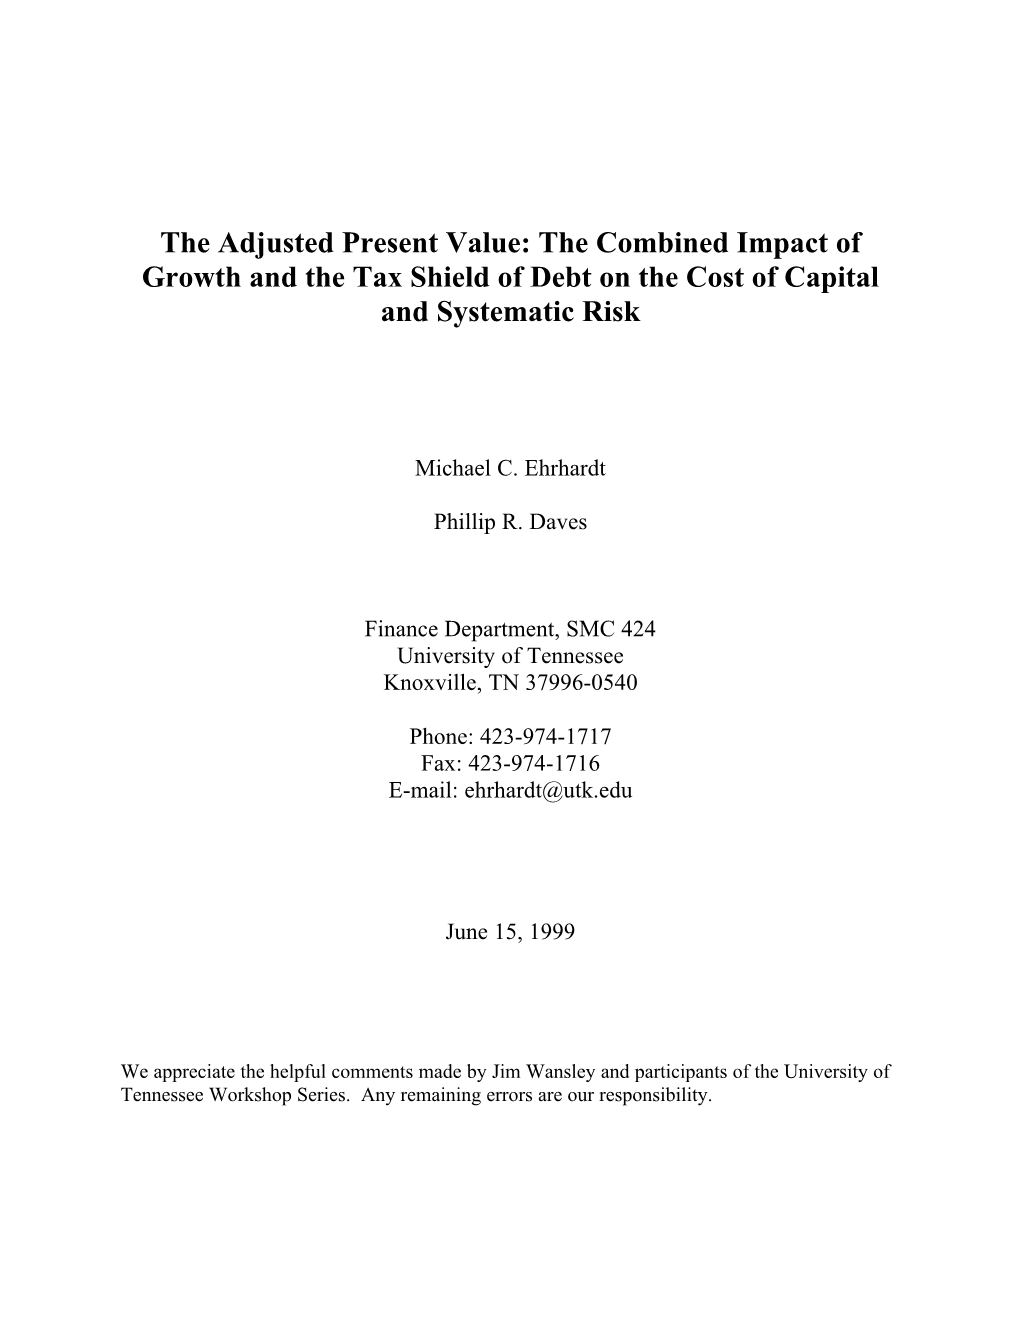 The Adjusted Present Value: the Combined Impact of Growth and the Tax Shield of Debt on the Cost of Capital and Systematic Risk